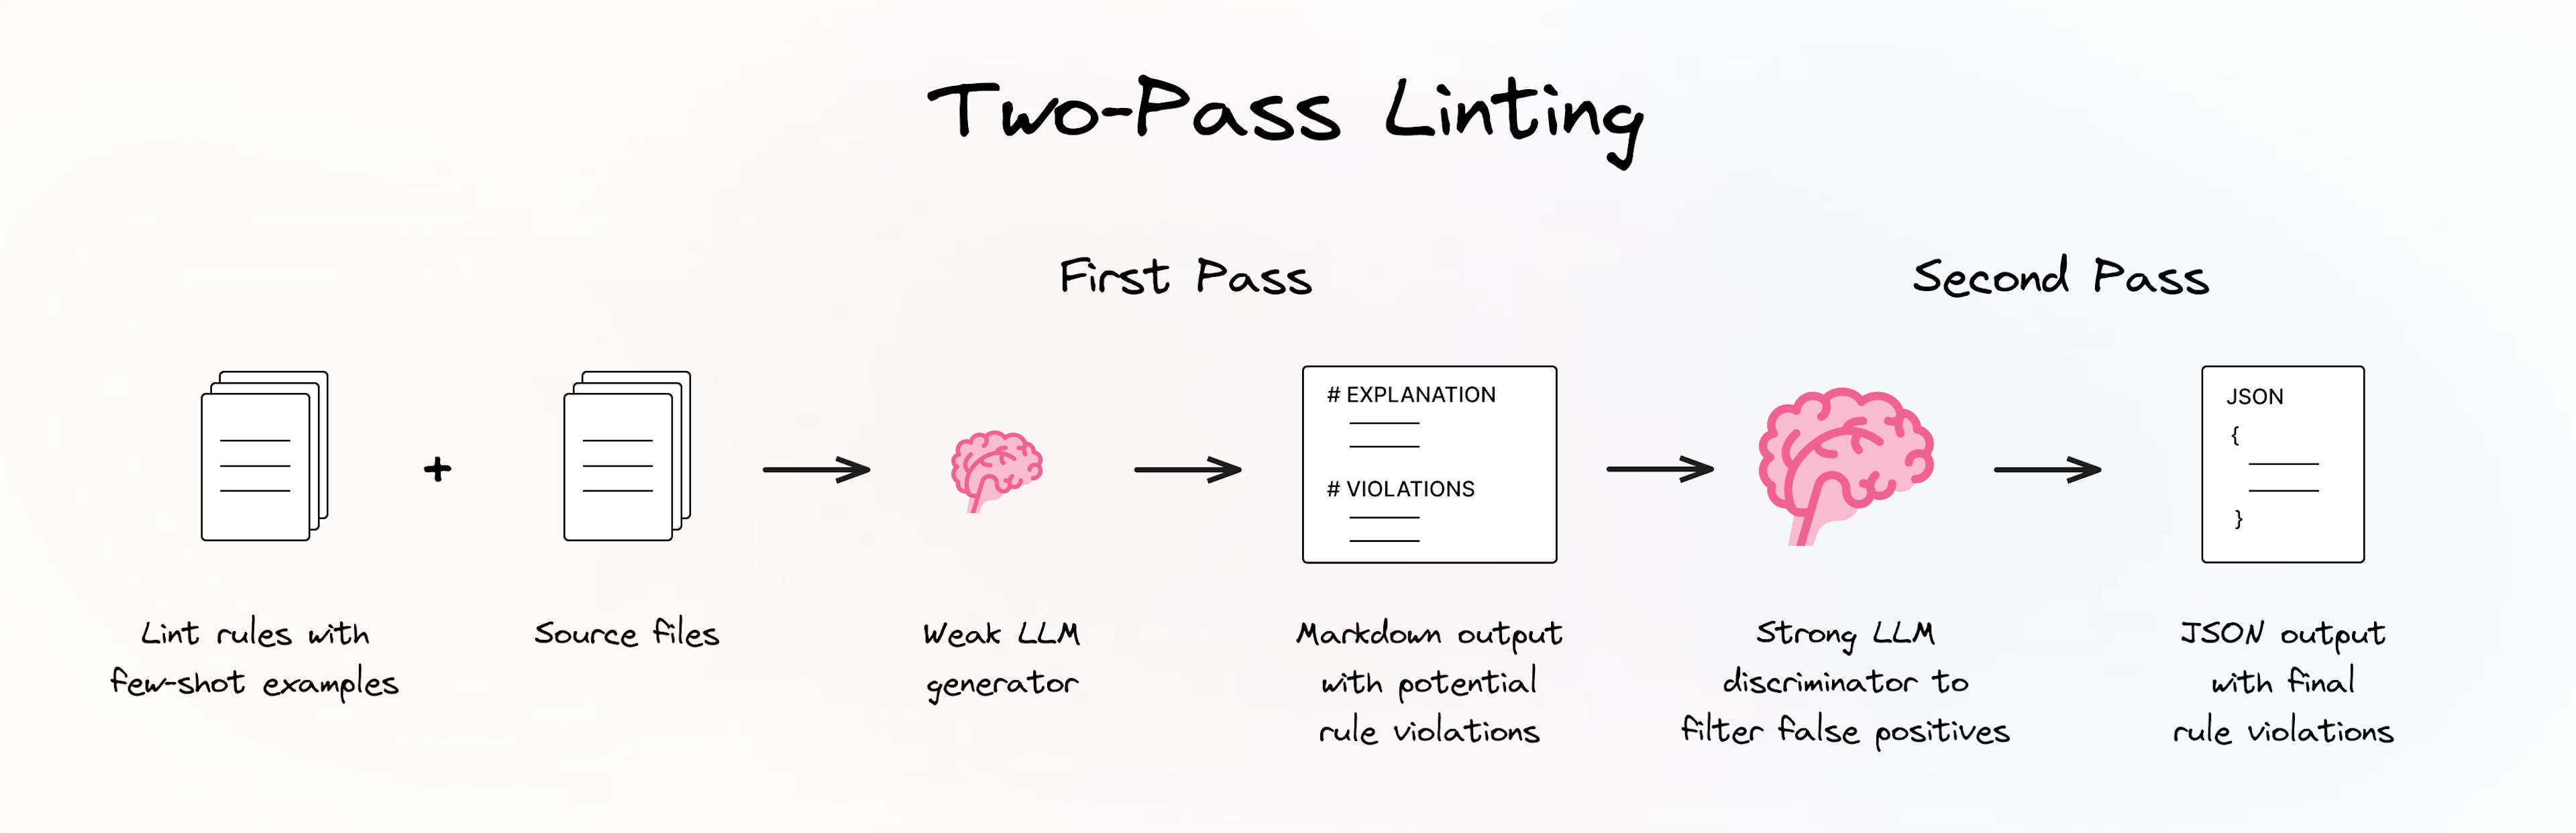 Two-Pass Linting